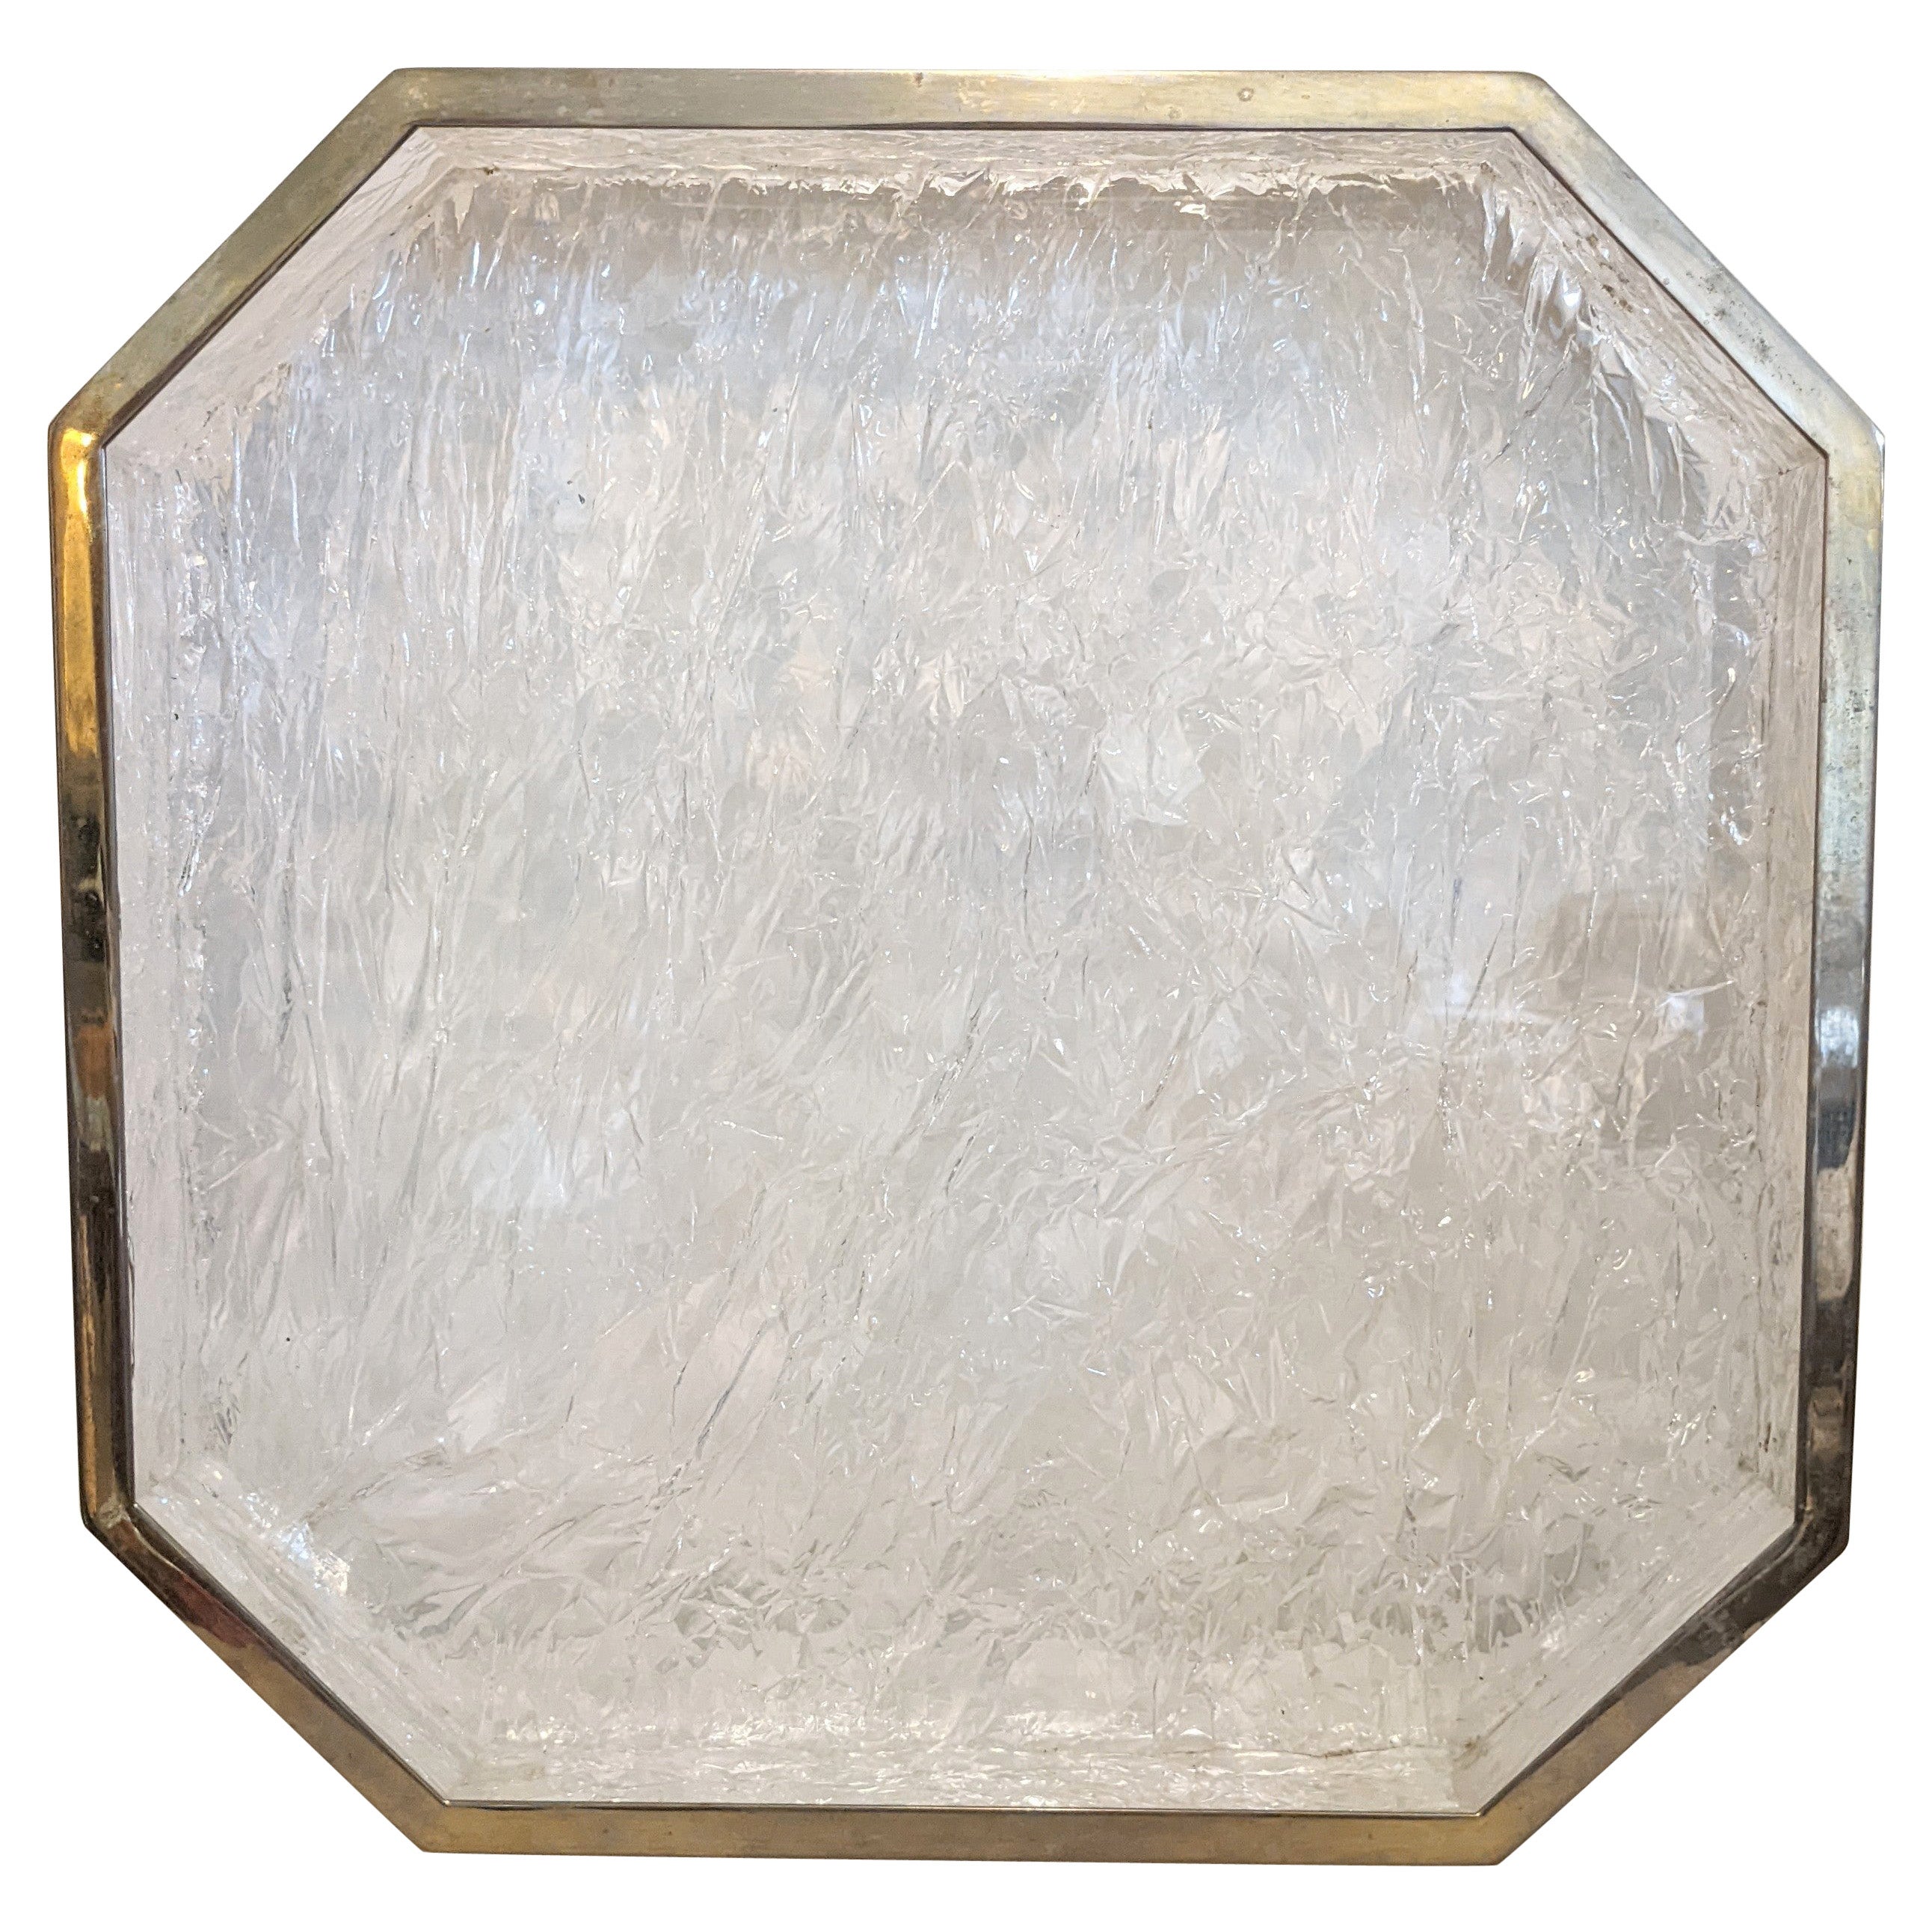 Lucite Crackled Ice Serving Tray, Willy Rizzo Style